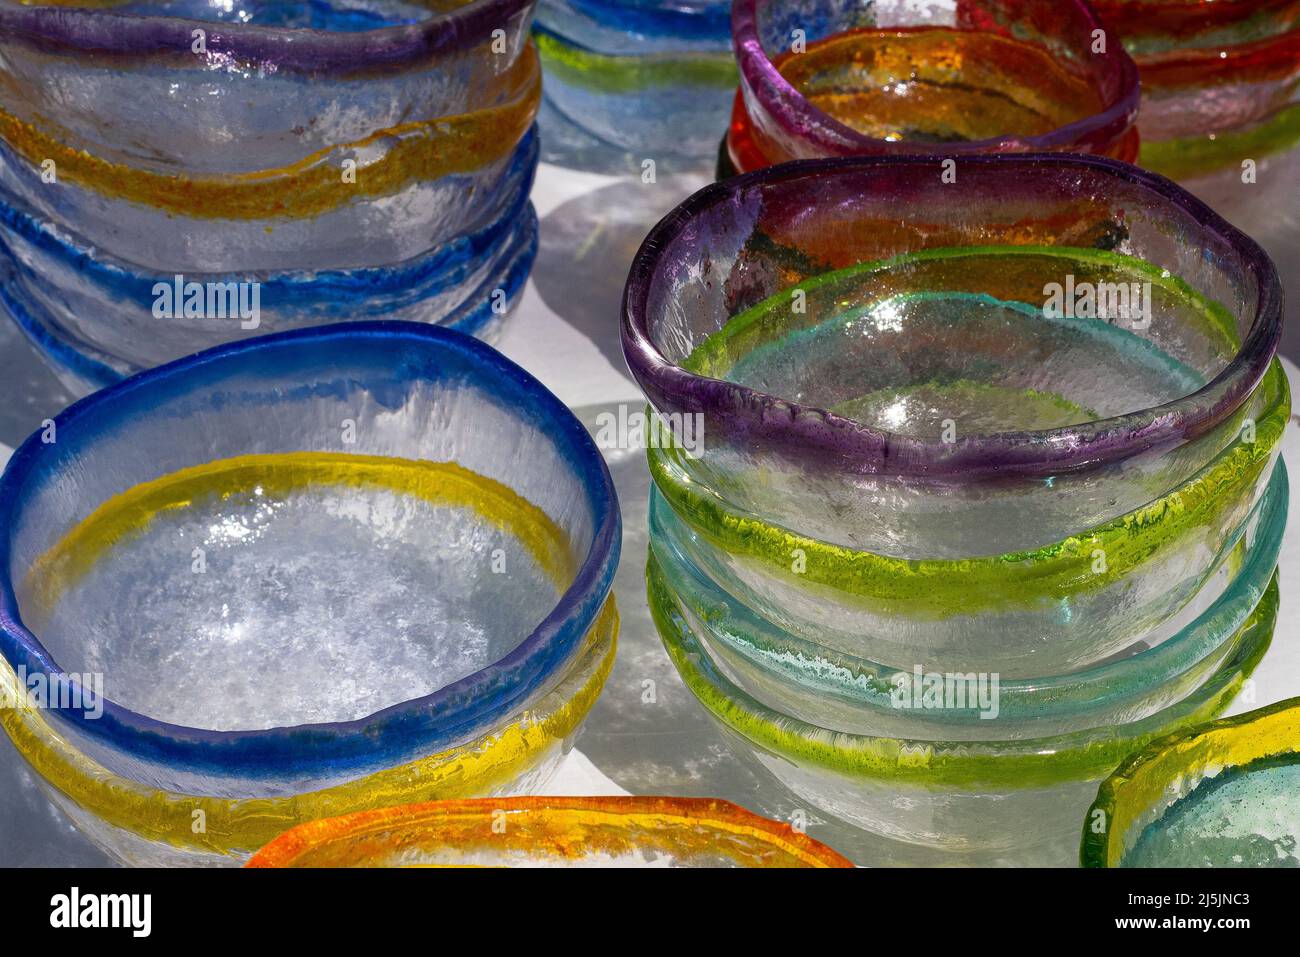 Colorful glass bowls on a white surface creating an abstract background. Stock Photo